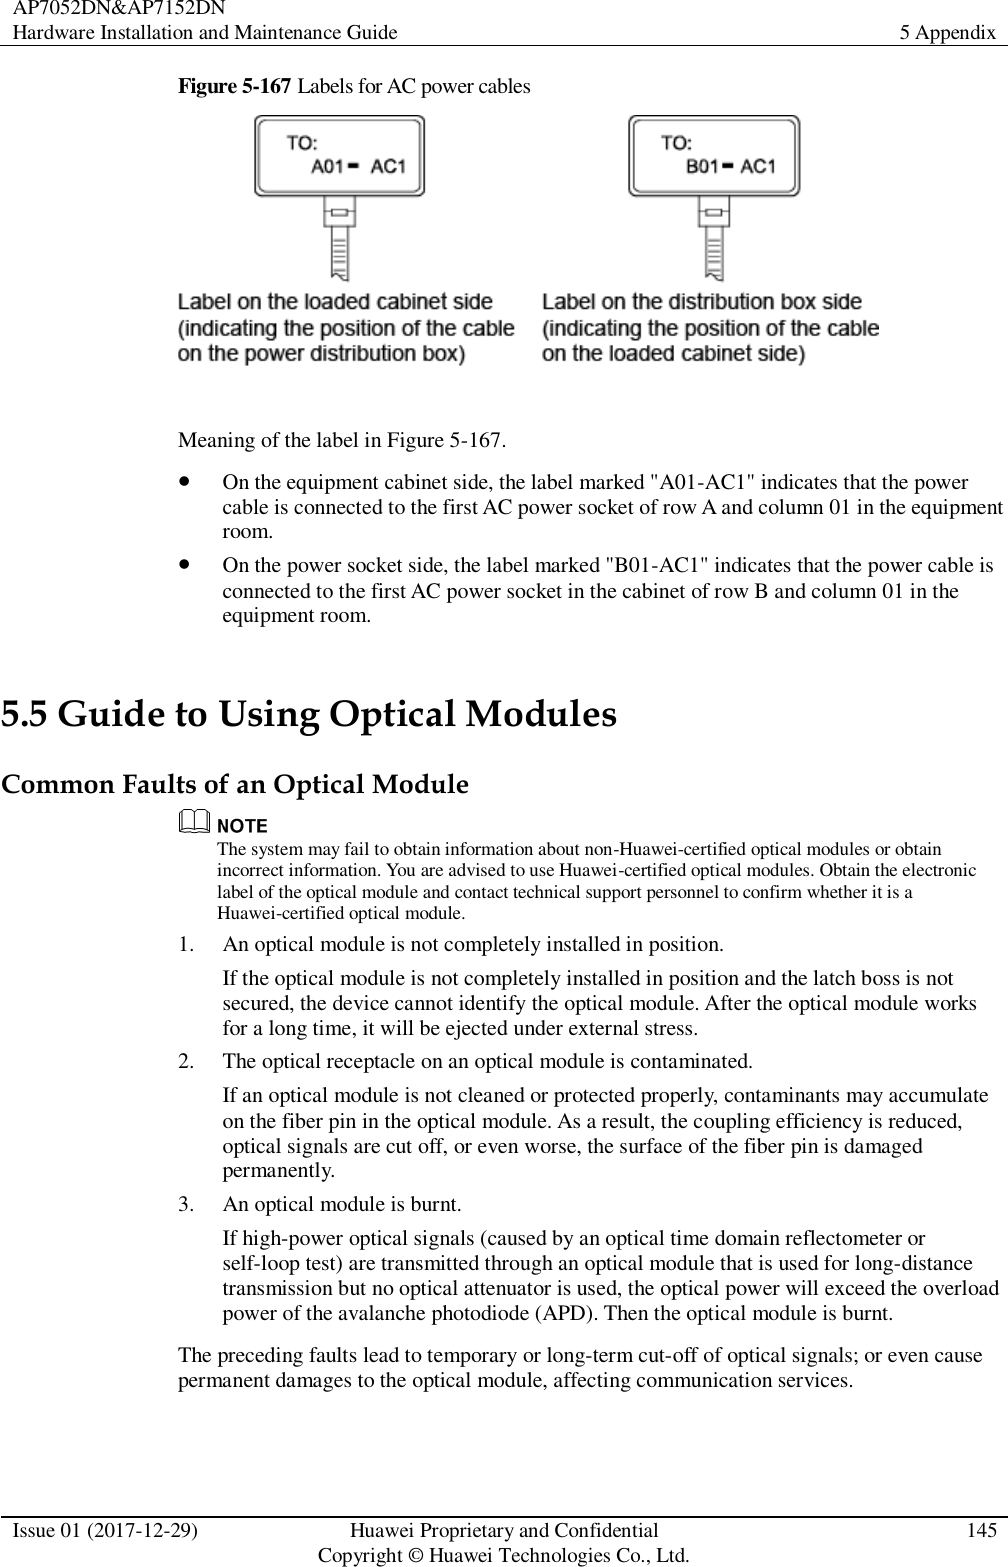 AP7052DN&amp;AP7152DN Hardware Installation and Maintenance Guide 5 Appendix  Issue 01 (2017-12-29) Huawei Proprietary and Confidential                                     Copyright © Huawei Technologies Co., Ltd. 145  Figure 5-167 Labels for AC power cables   Meaning of the label in Figure 5-167.  On the equipment cabinet side, the label marked &quot;A01-AC1&quot; indicates that the power cable is connected to the first AC power socket of row A and column 01 in the equipment room.  On the power socket side, the label marked &quot;B01-AC1&quot; indicates that the power cable is connected to the first AC power socket in the cabinet of row B and column 01 in the equipment room. 5.5 Guide to Using Optical Modules Common Faults of an Optical Module  The system may fail to obtain information about non-Huawei-certified optical modules or obtain incorrect information. You are advised to use Huawei-certified optical modules. Obtain the electronic label of the optical module and contact technical support personnel to confirm whether it is a Huawei-certified optical module. 1. An optical module is not completely installed in position. If the optical module is not completely installed in position and the latch boss is not secured, the device cannot identify the optical module. After the optical module works for a long time, it will be ejected under external stress. 2. The optical receptacle on an optical module is contaminated. If an optical module is not cleaned or protected properly, contaminants may accumulate on the fiber pin in the optical module. As a result, the coupling efficiency is reduced, optical signals are cut off, or even worse, the surface of the fiber pin is damaged permanently. 3. An optical module is burnt. If high-power optical signals (caused by an optical time domain reflectometer or self-loop test) are transmitted through an optical module that is used for long-distance transmission but no optical attenuator is used, the optical power will exceed the overload power of the avalanche photodiode (APD). Then the optical module is burnt. The preceding faults lead to temporary or long-term cut-off of optical signals; or even cause permanent damages to the optical module, affecting communication services. 